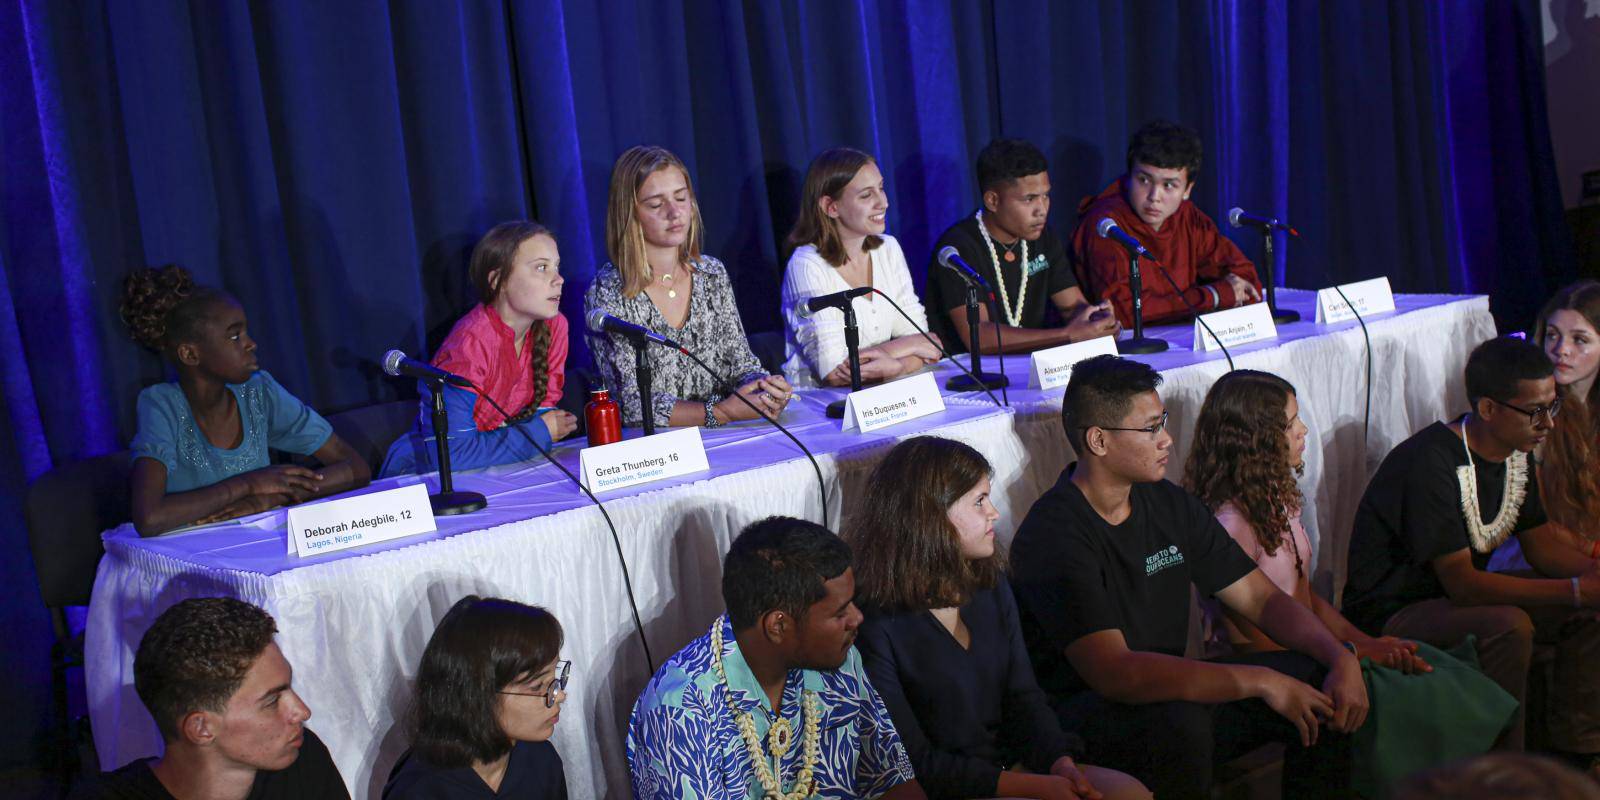 Greta Thunberg speaking at a press conference given by 16 youth climate activists in New York on 23 September 2019